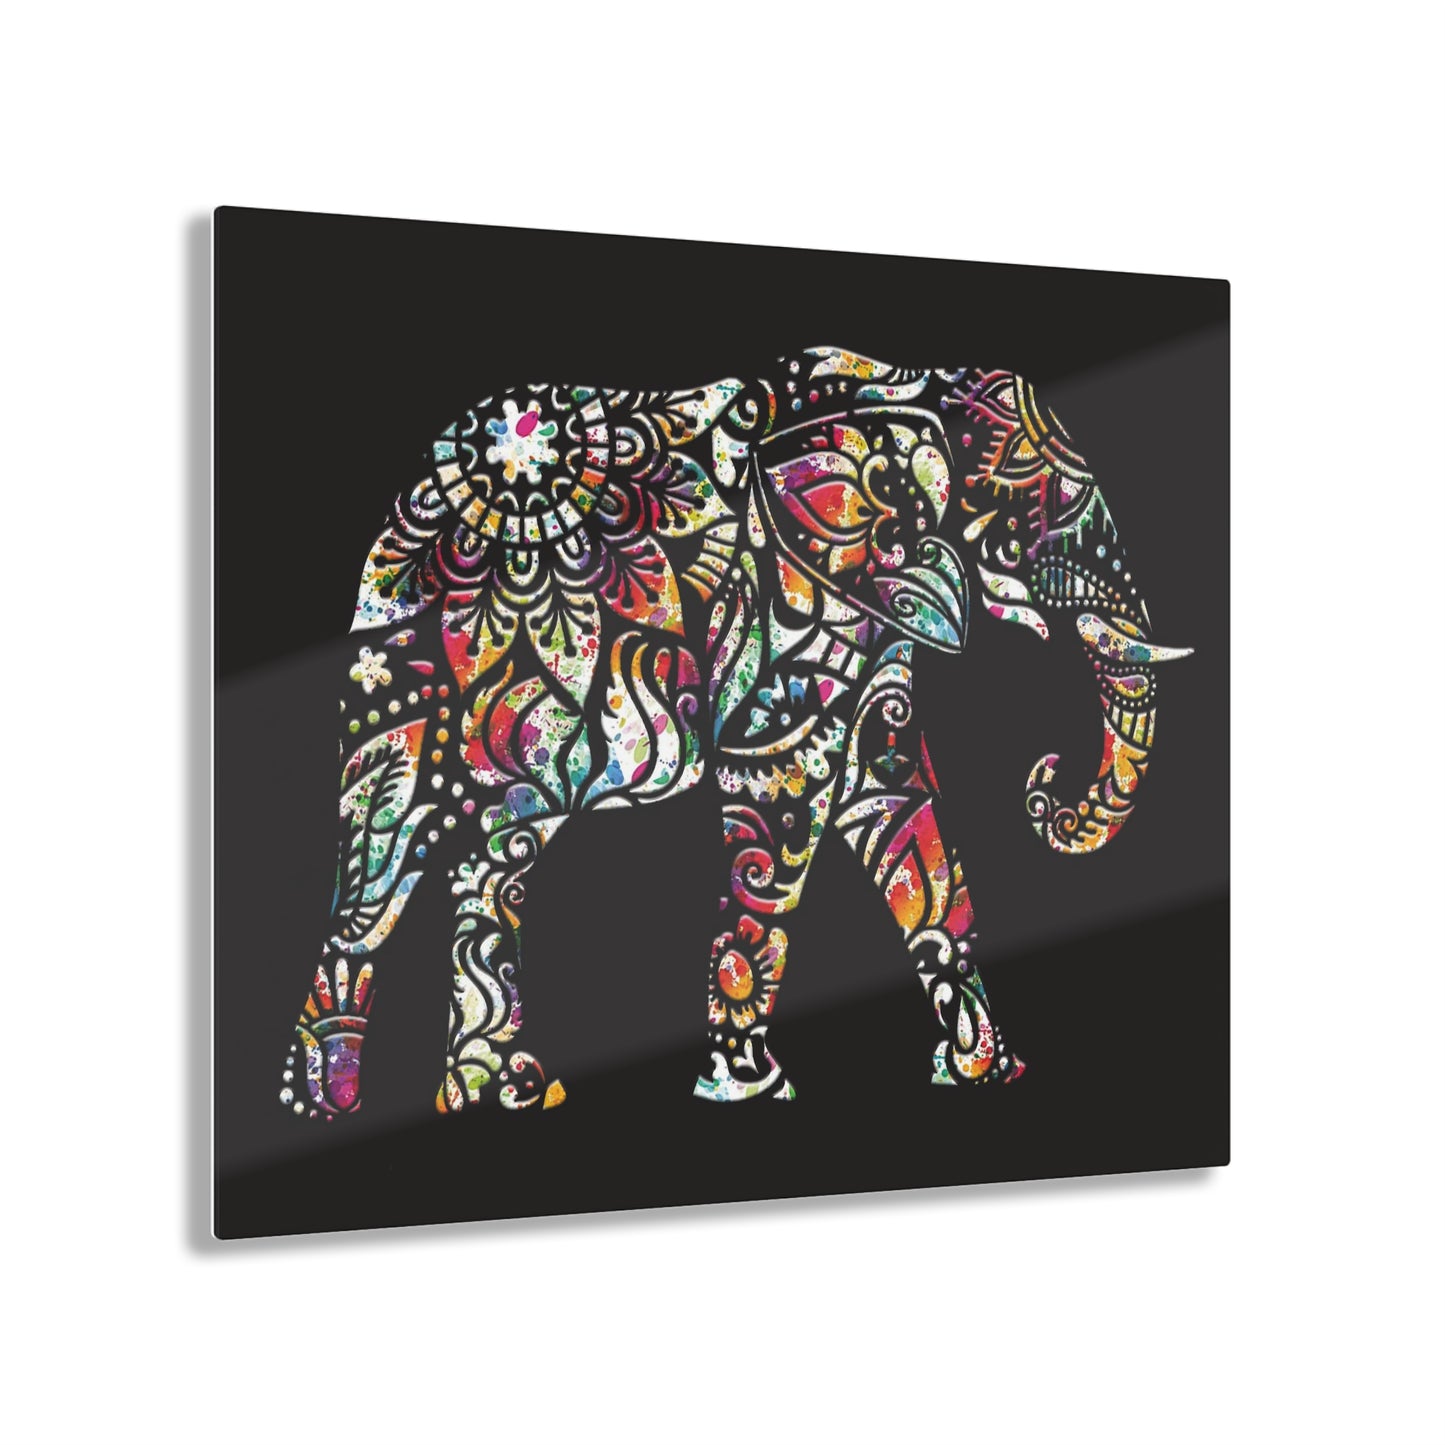 Elephant Themed Wall Art - Multicolor Indian Elephant on Black Background Printed on a Crystal Clear Acrylic Panel